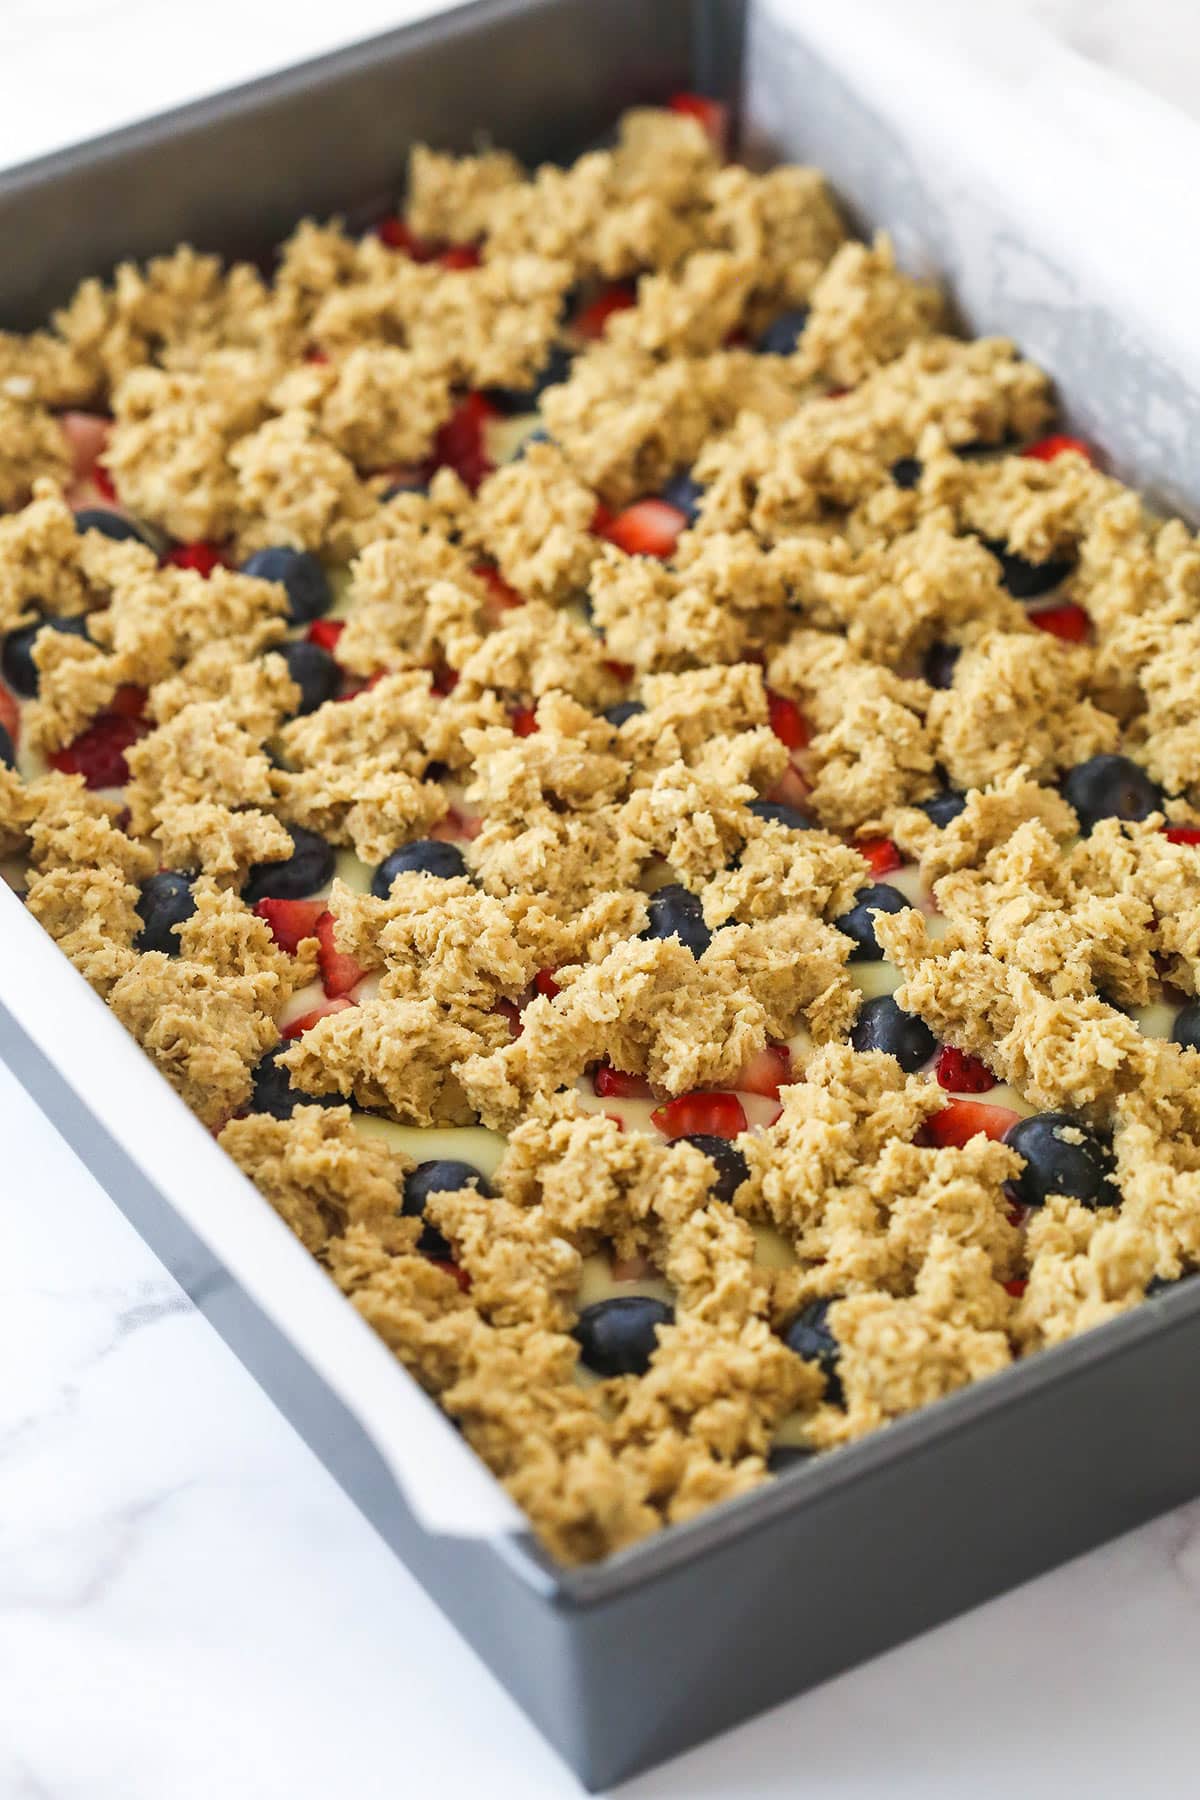 Sprinkling crumbled oatmeal cookie dough on top the cheesecake filling for berry oatmeal cheesecake bars.